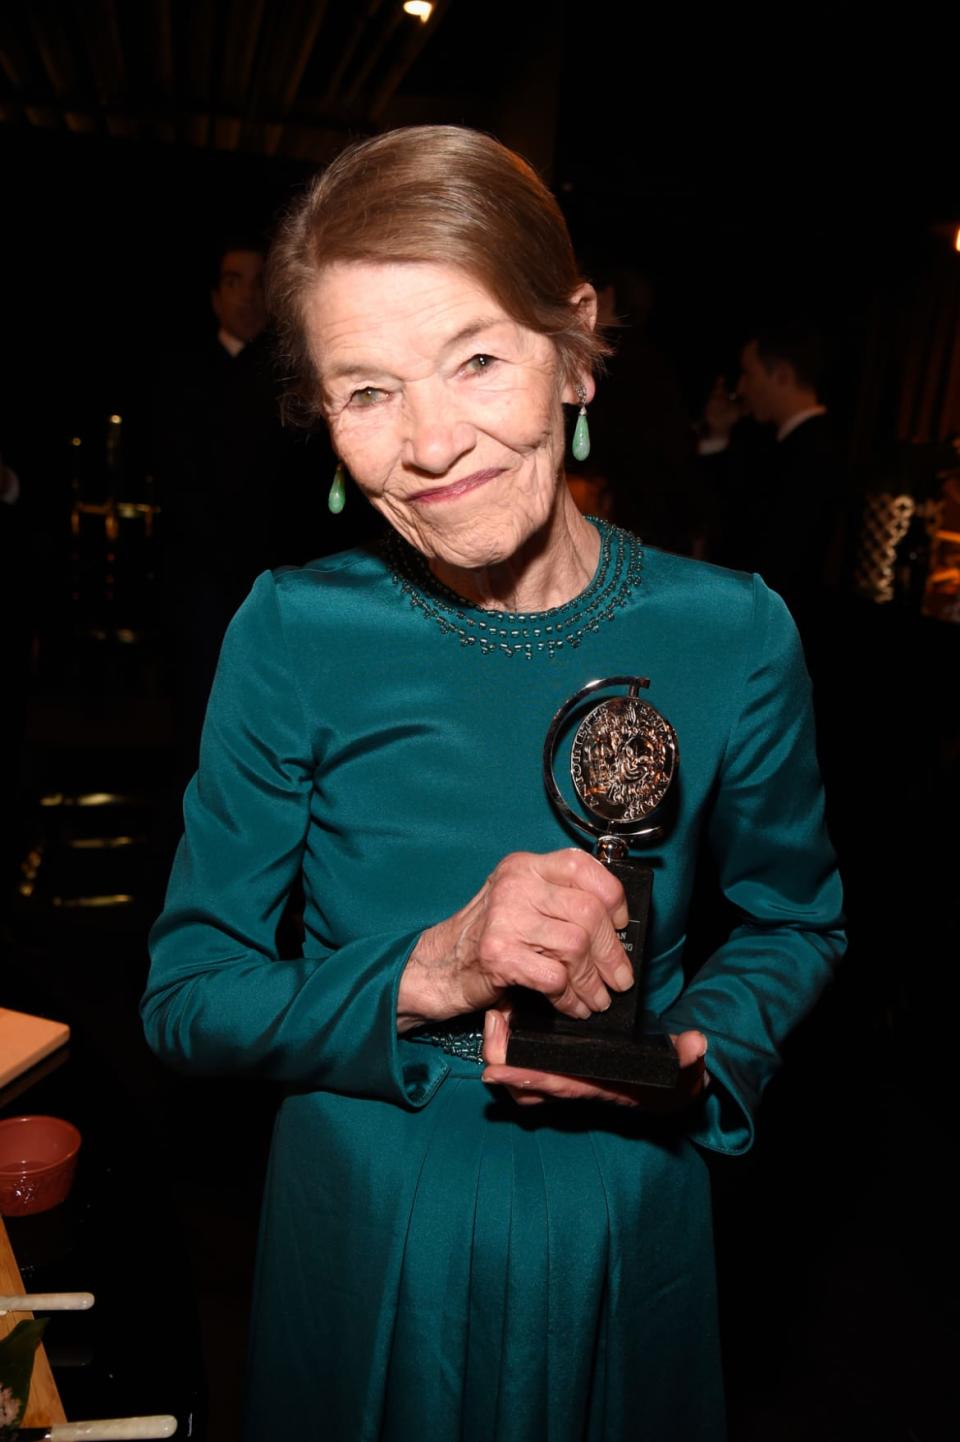 <div class="inline-image__caption"><p>Glenda Jackson poses with the award for Best Performance by an Actress in a Leading Role in a Play for Edward Albee's <em>Three Tall Women</em>, during the 72nd Annual Tony Awards at Radio City Music Hall on June 10, 2018, in New York City.</p></div> <div class="inline-image__credit">Kevin Mazur/Getty</div>